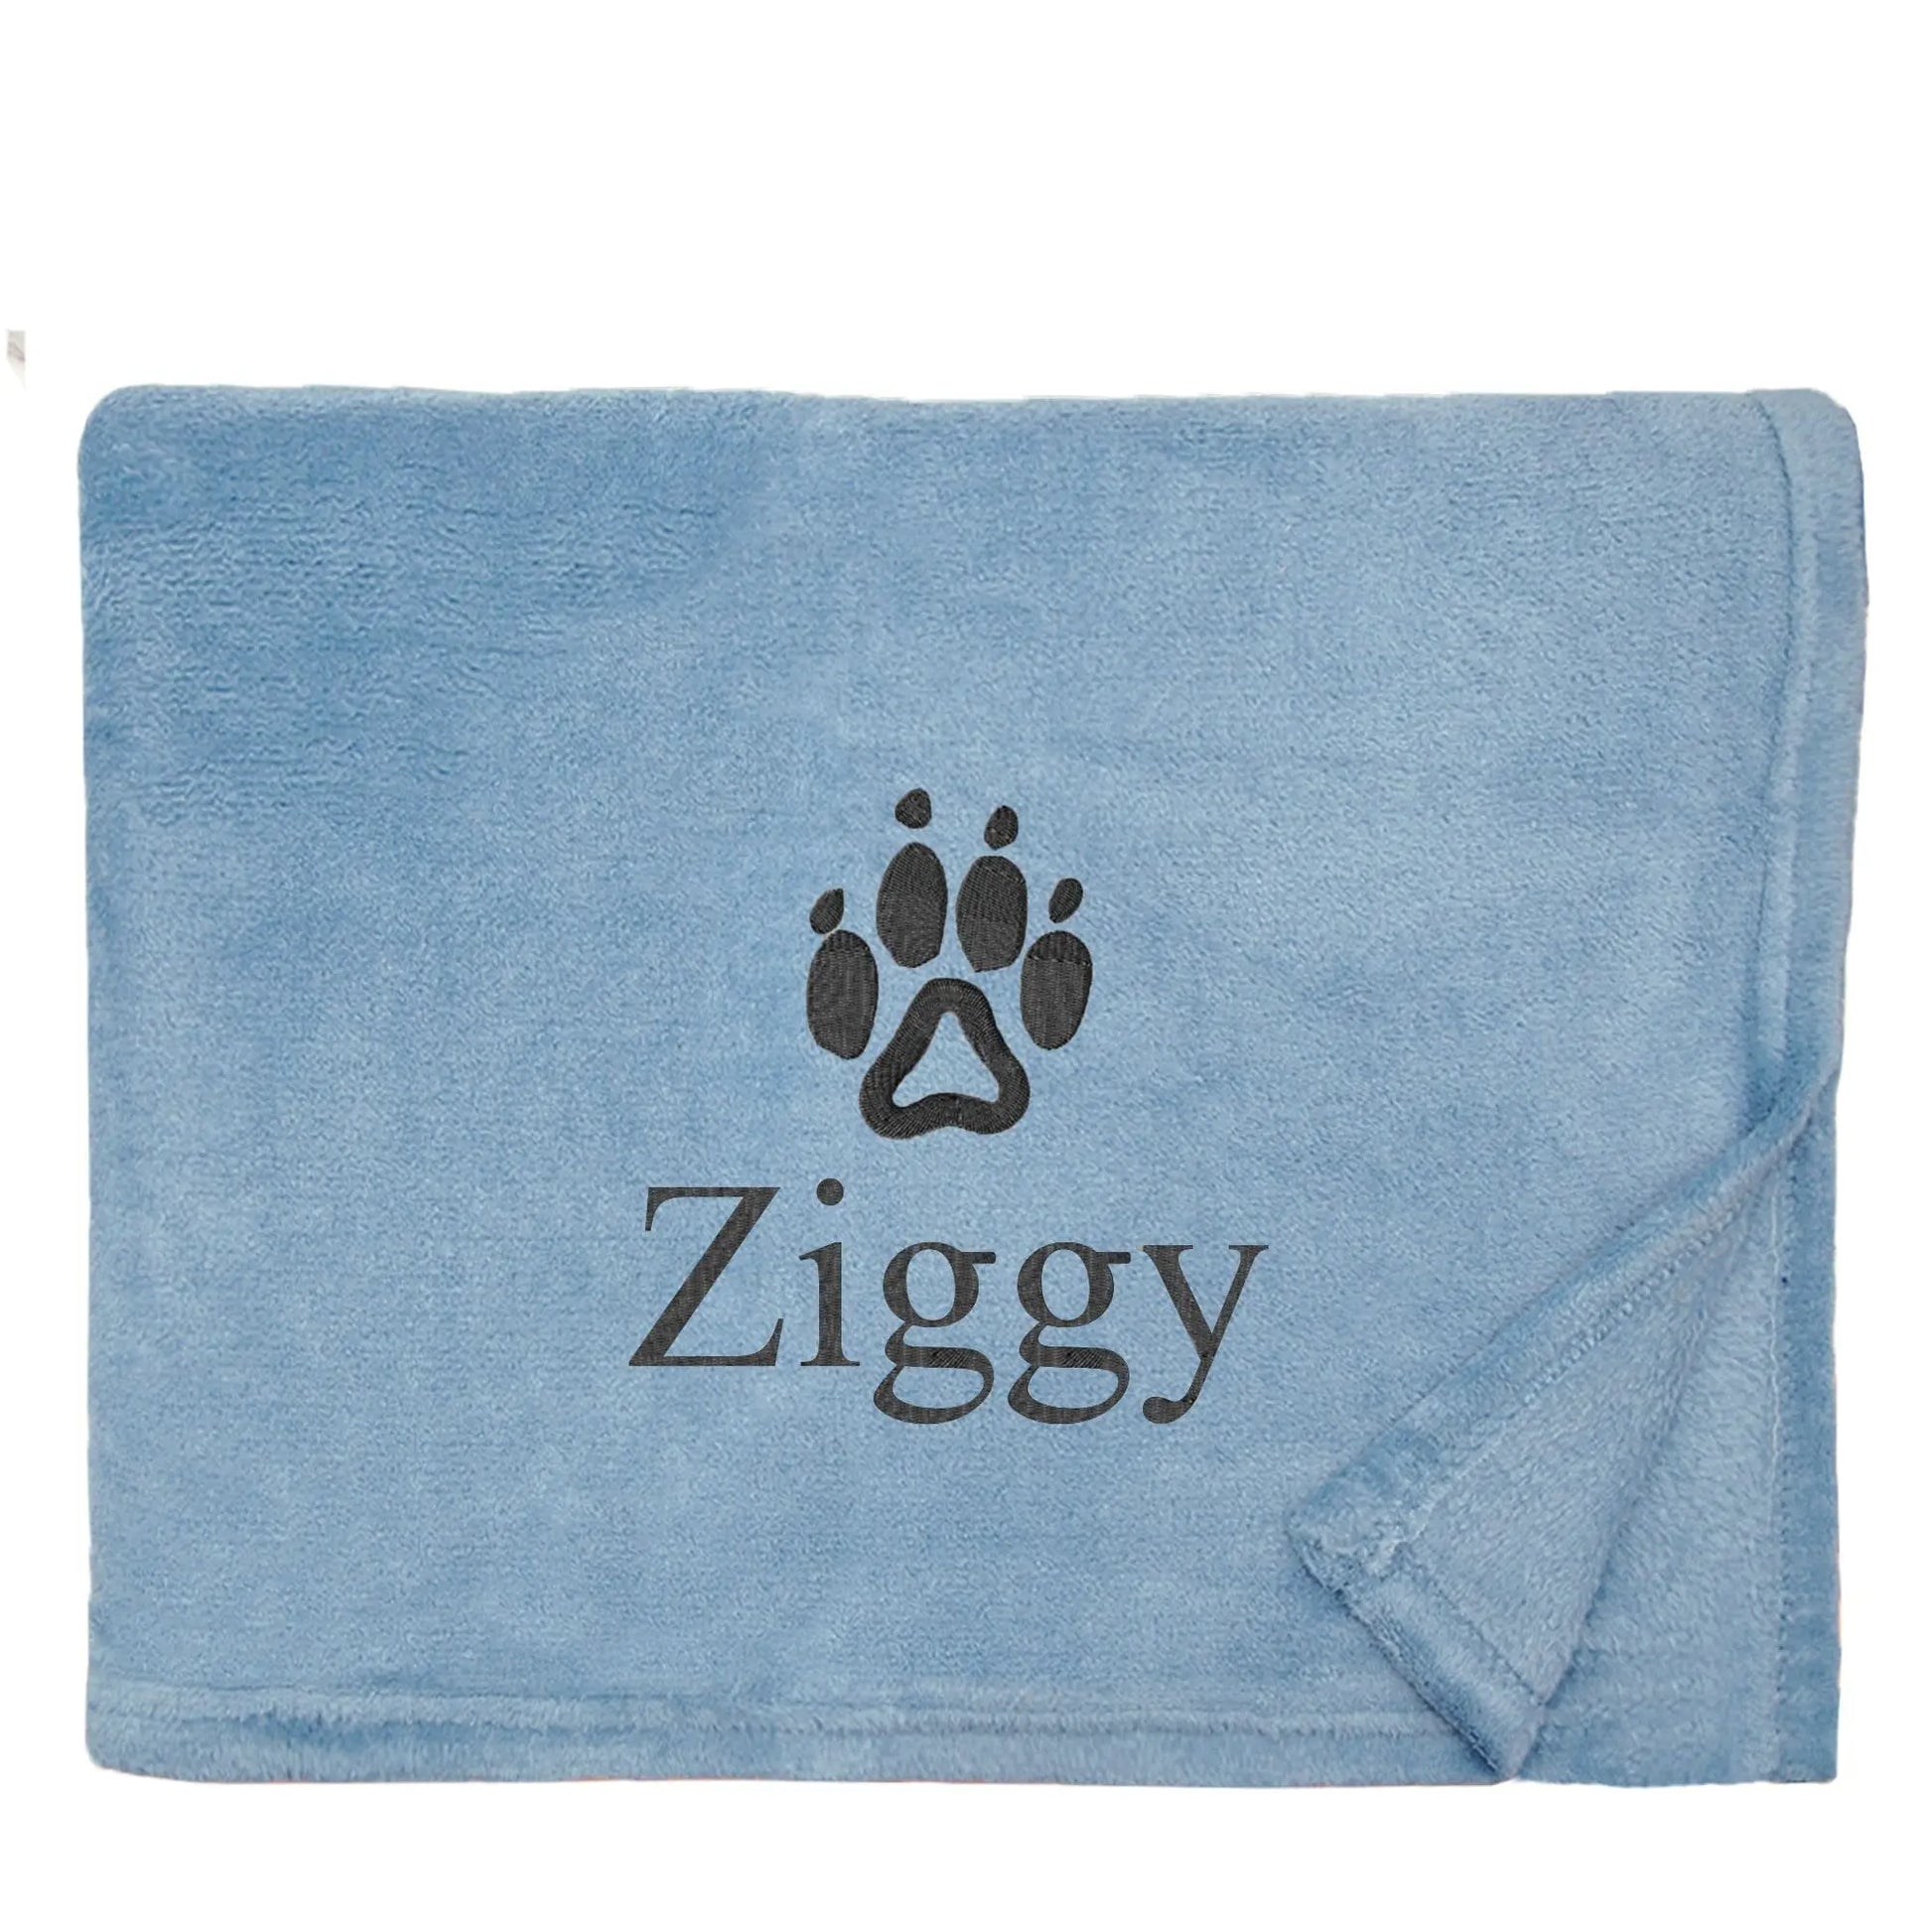 Large Dog Blanket in Mid Blue Colour, personalised with the name Ziggy underneath a paw print